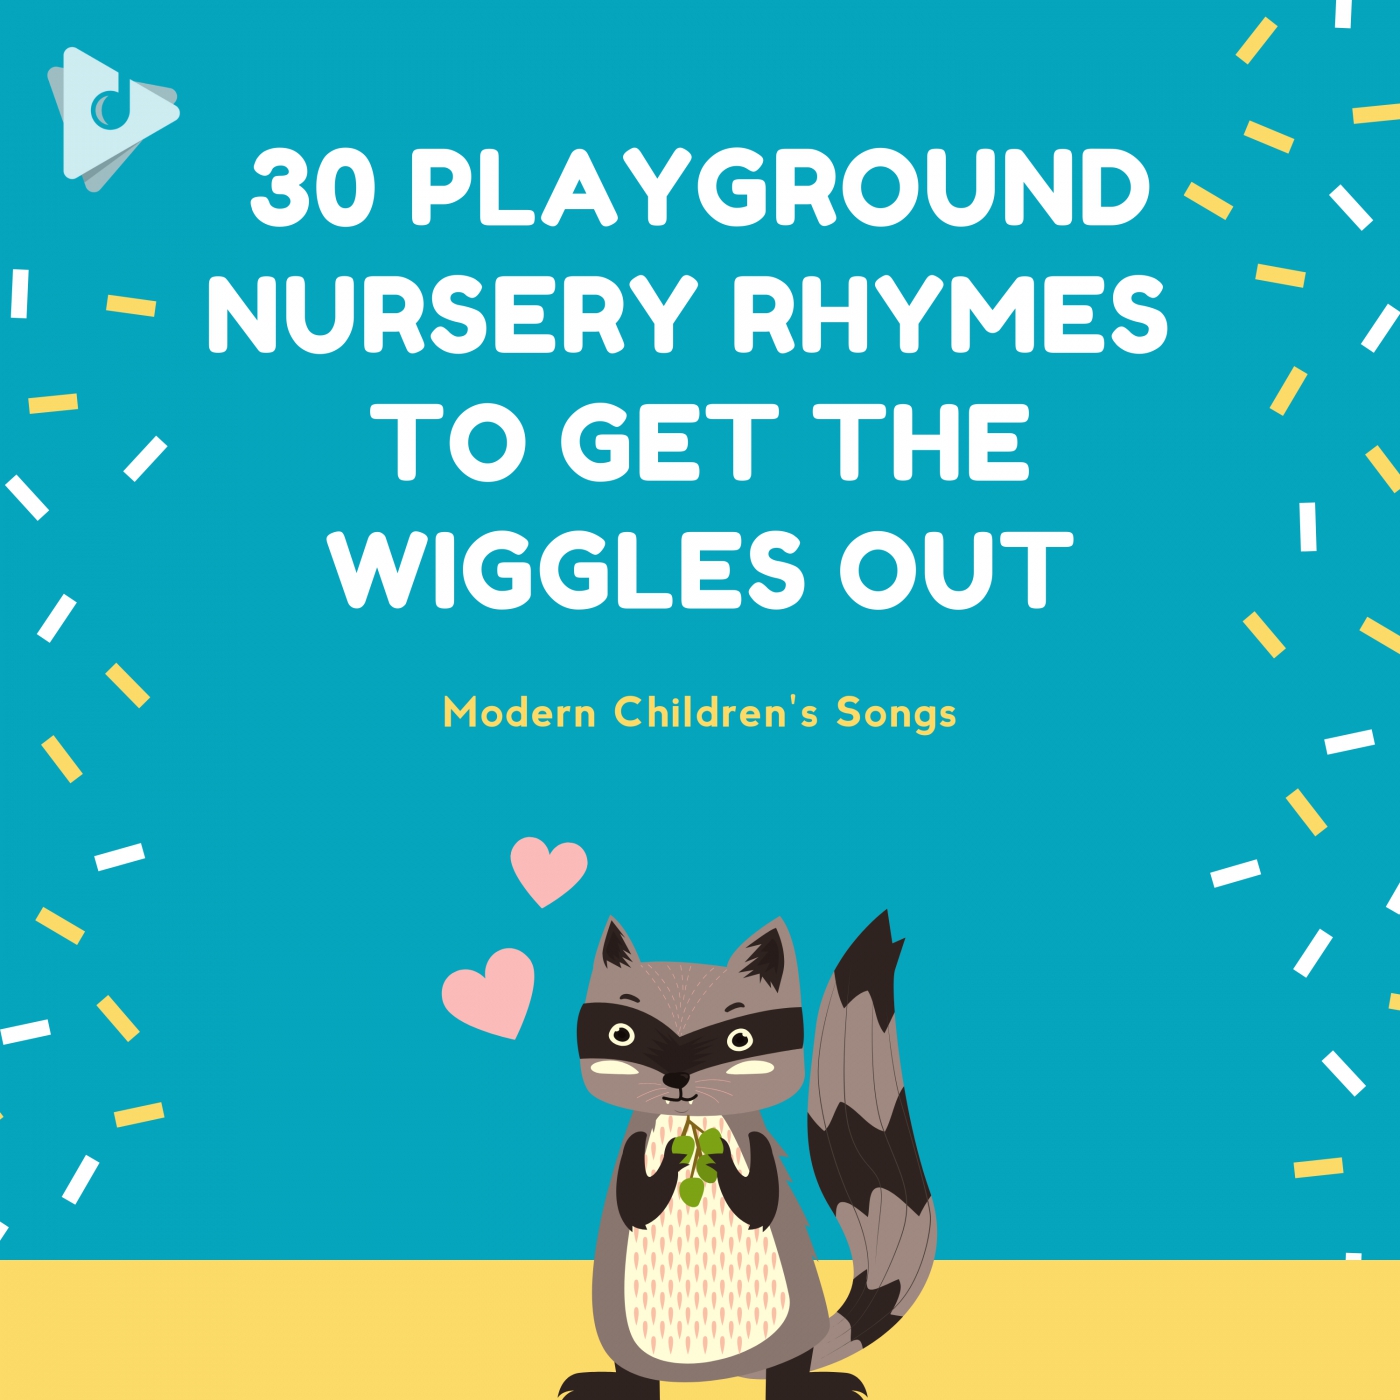 30 Playground Nursery Rhymes to Get the Wiggles Out